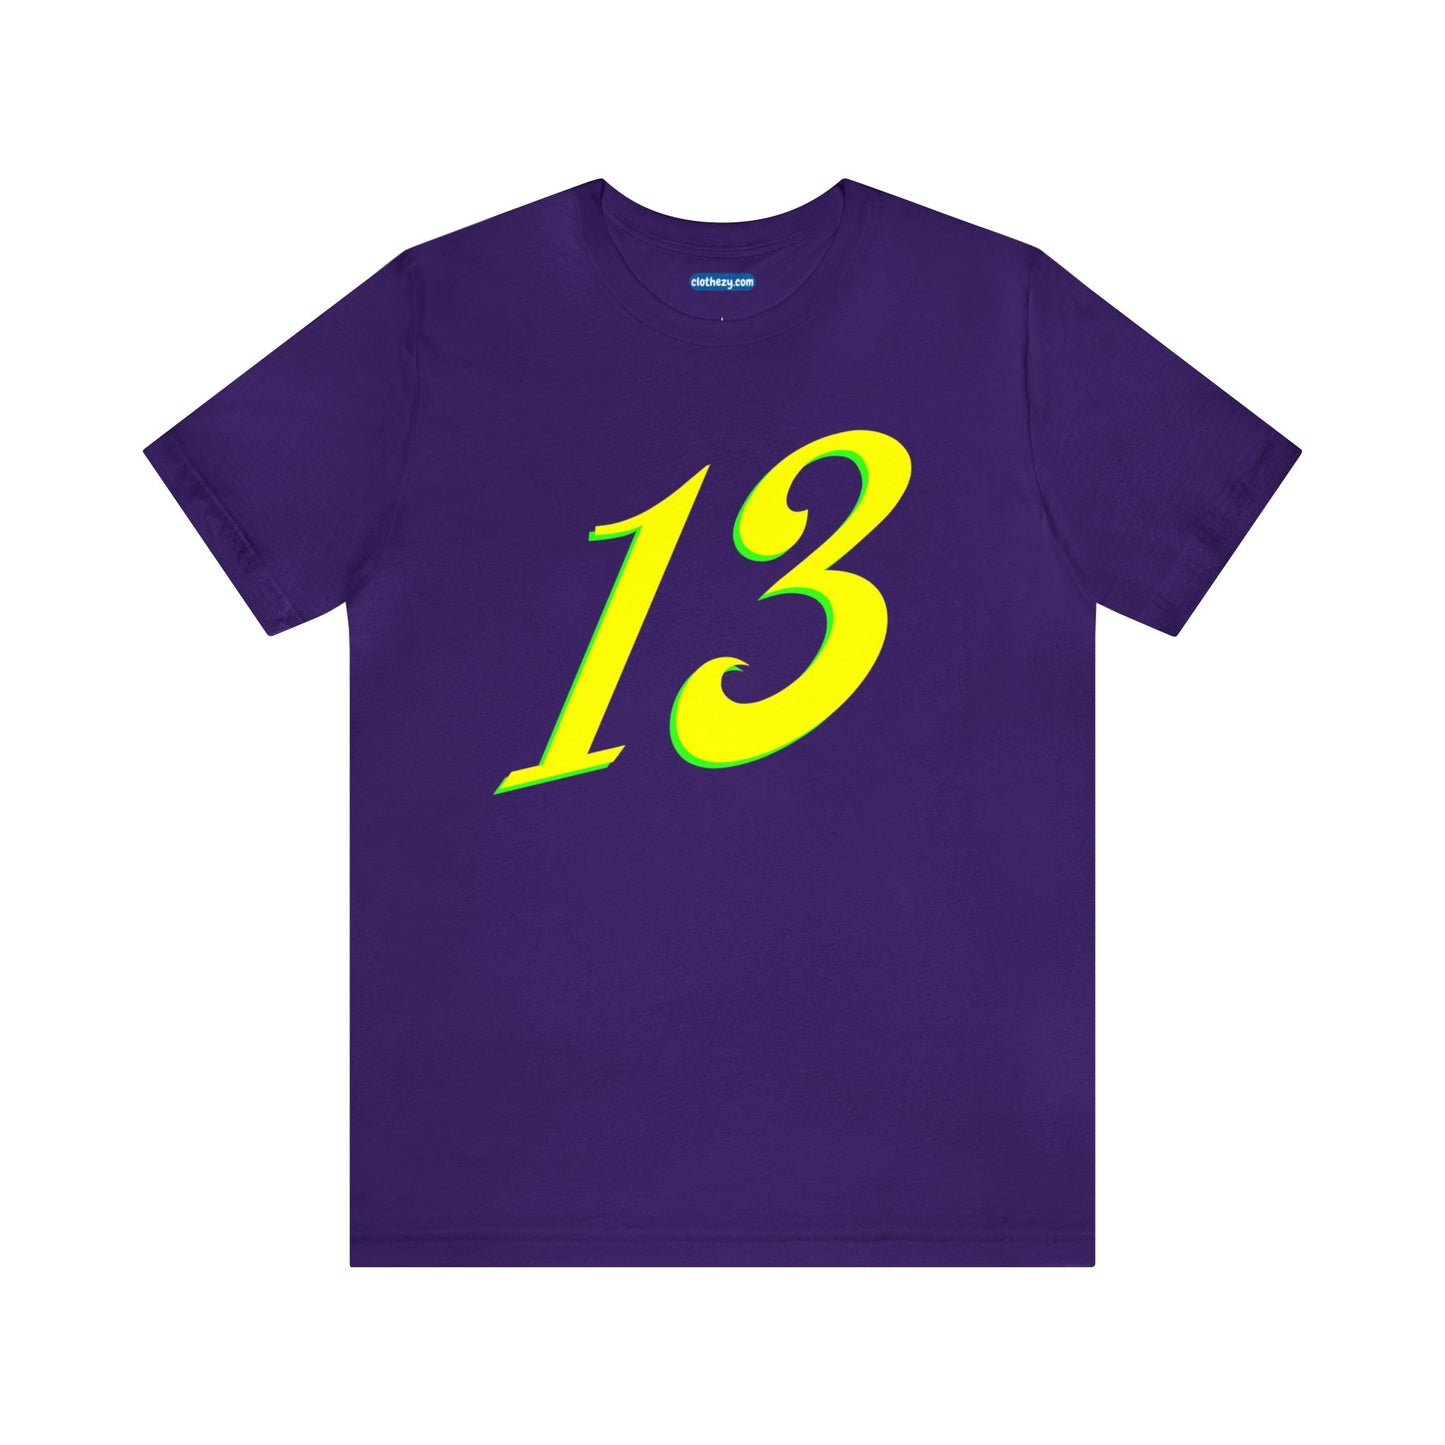 Number 13 Design - Soft Cotton Tee for birthdays and celebrations, Gift for friends and family, Multiple Options by clothezy.com in Purple Size Small - Buy Now